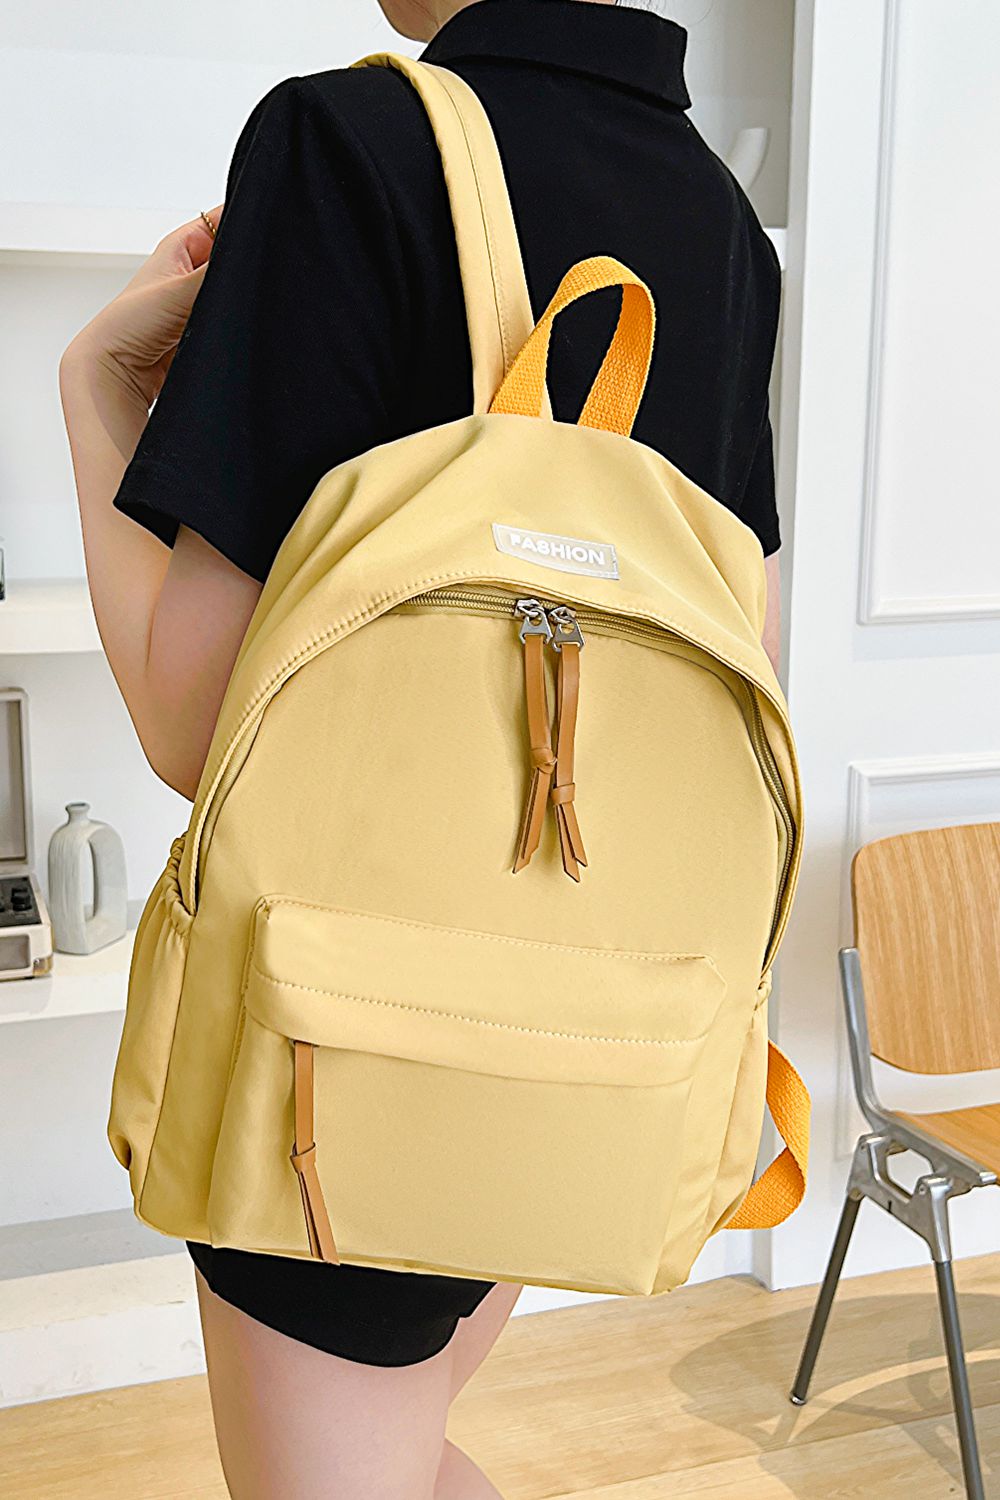 Tan FASHION Polyester Backpack Sentient Beauty Fashions Bag